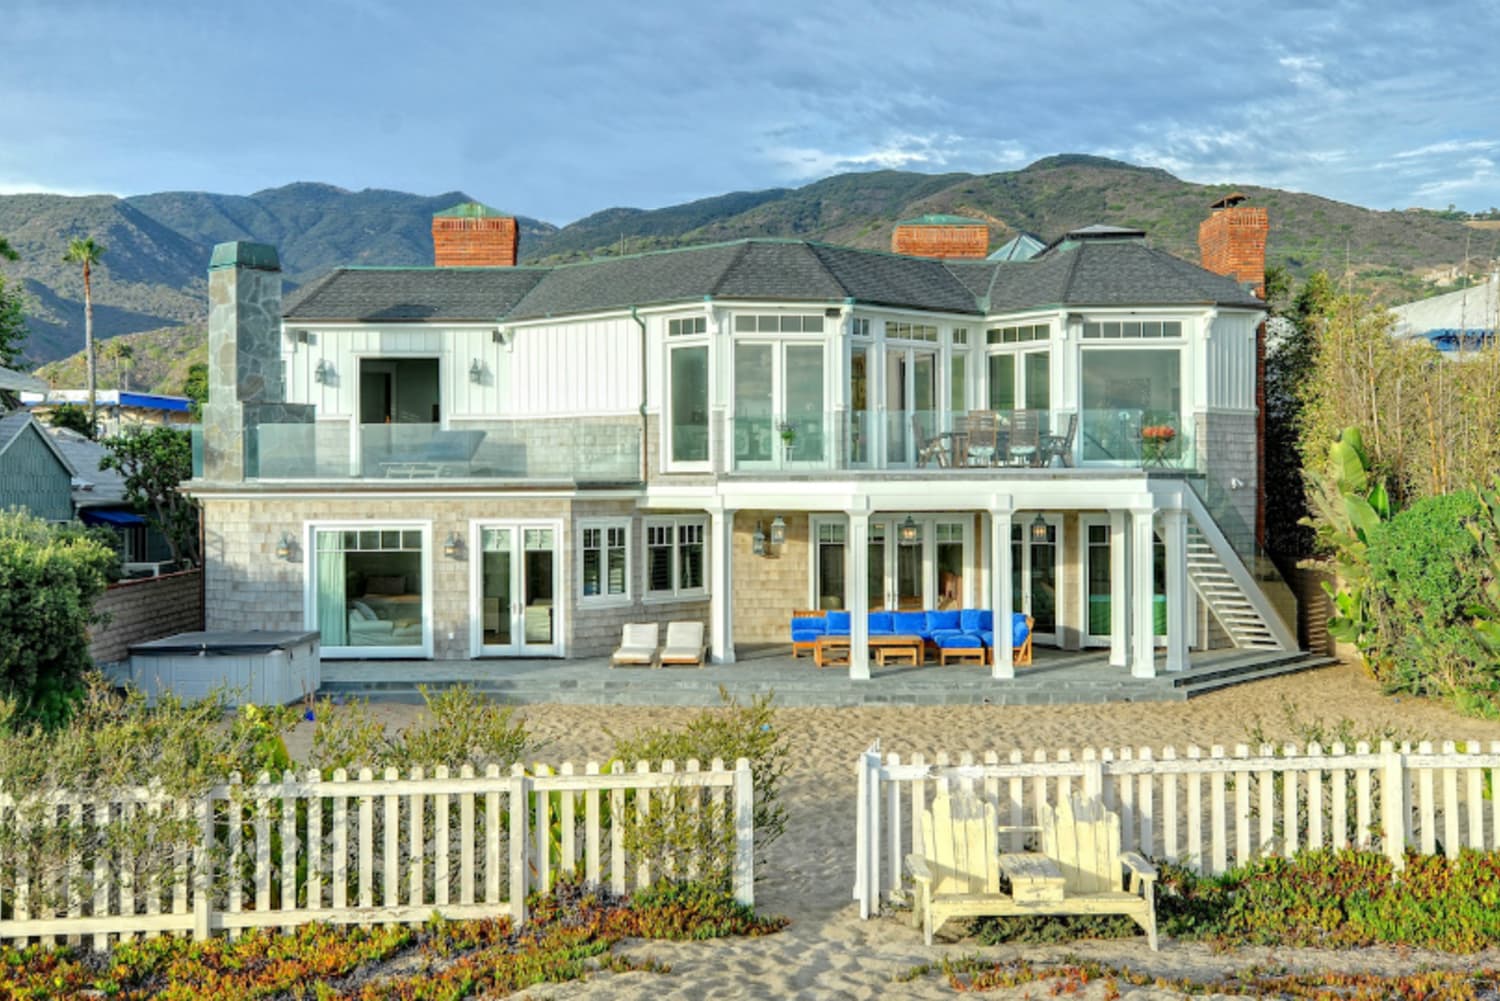 Rent Reese Witherspoons Big Little Lies Beach House 